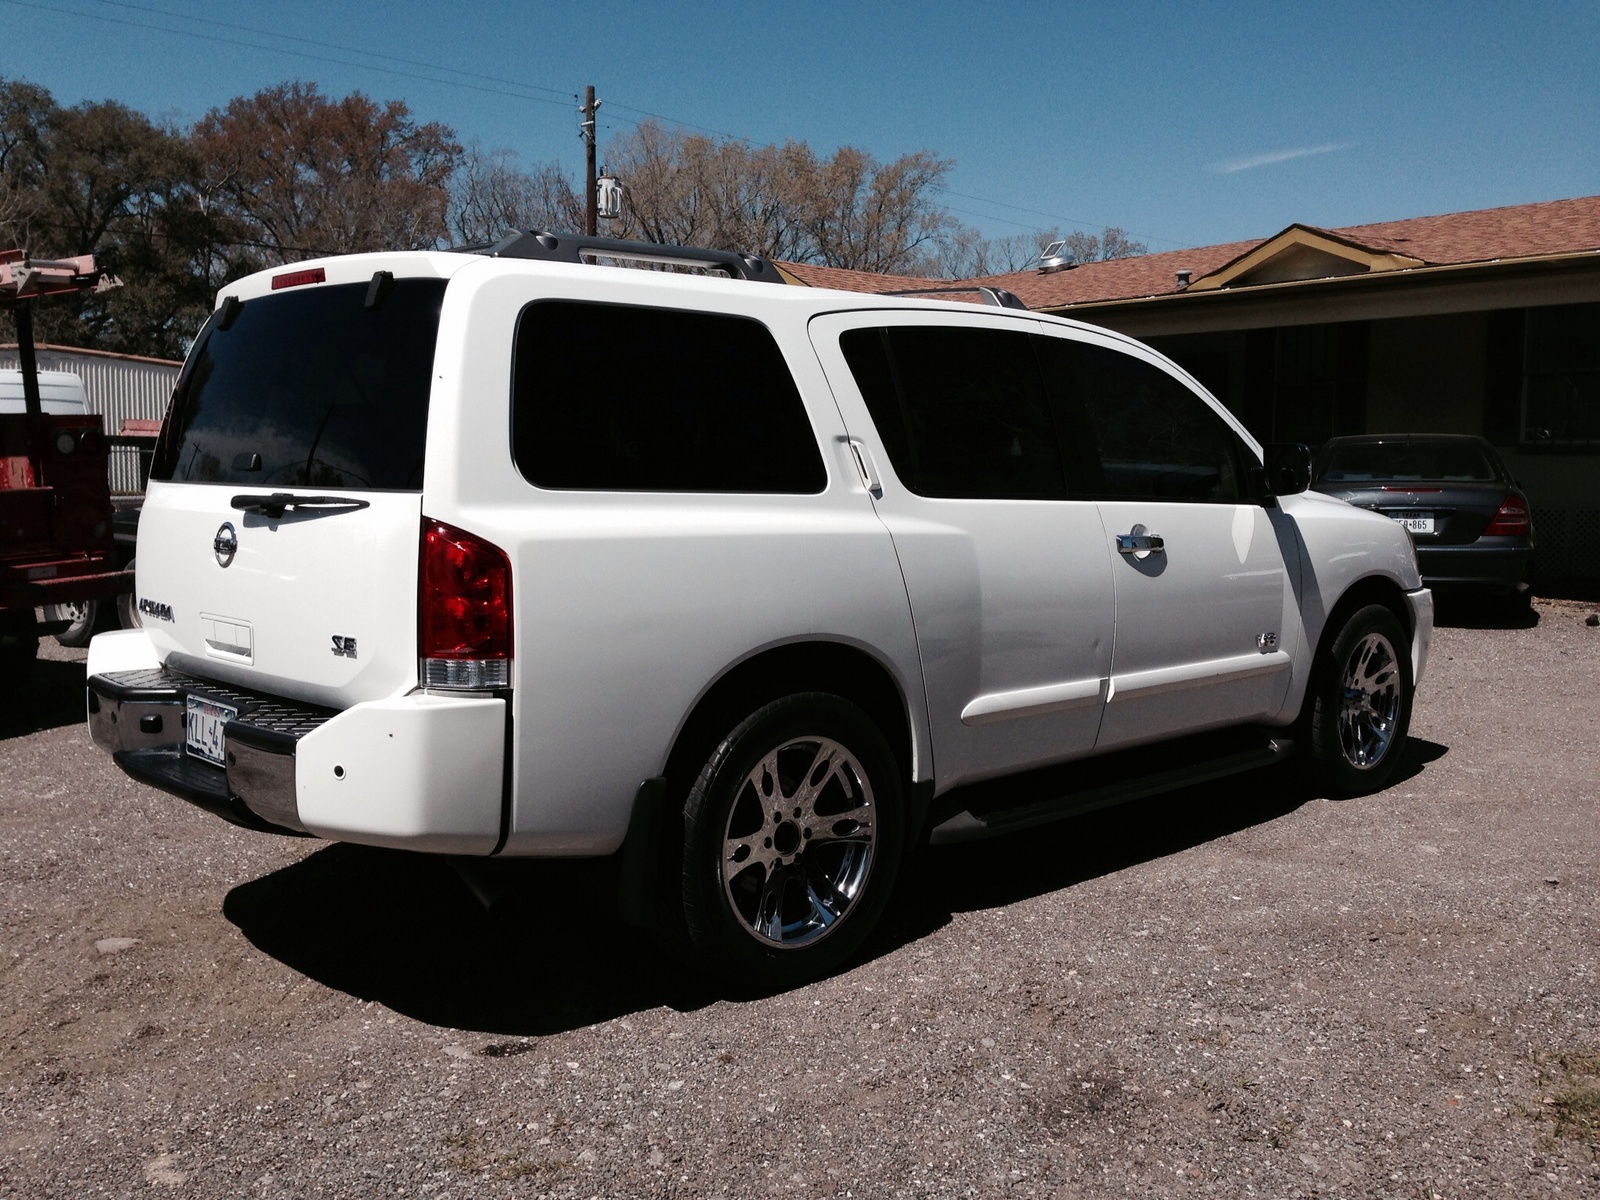 Finding a used 2007 nissan armada #7